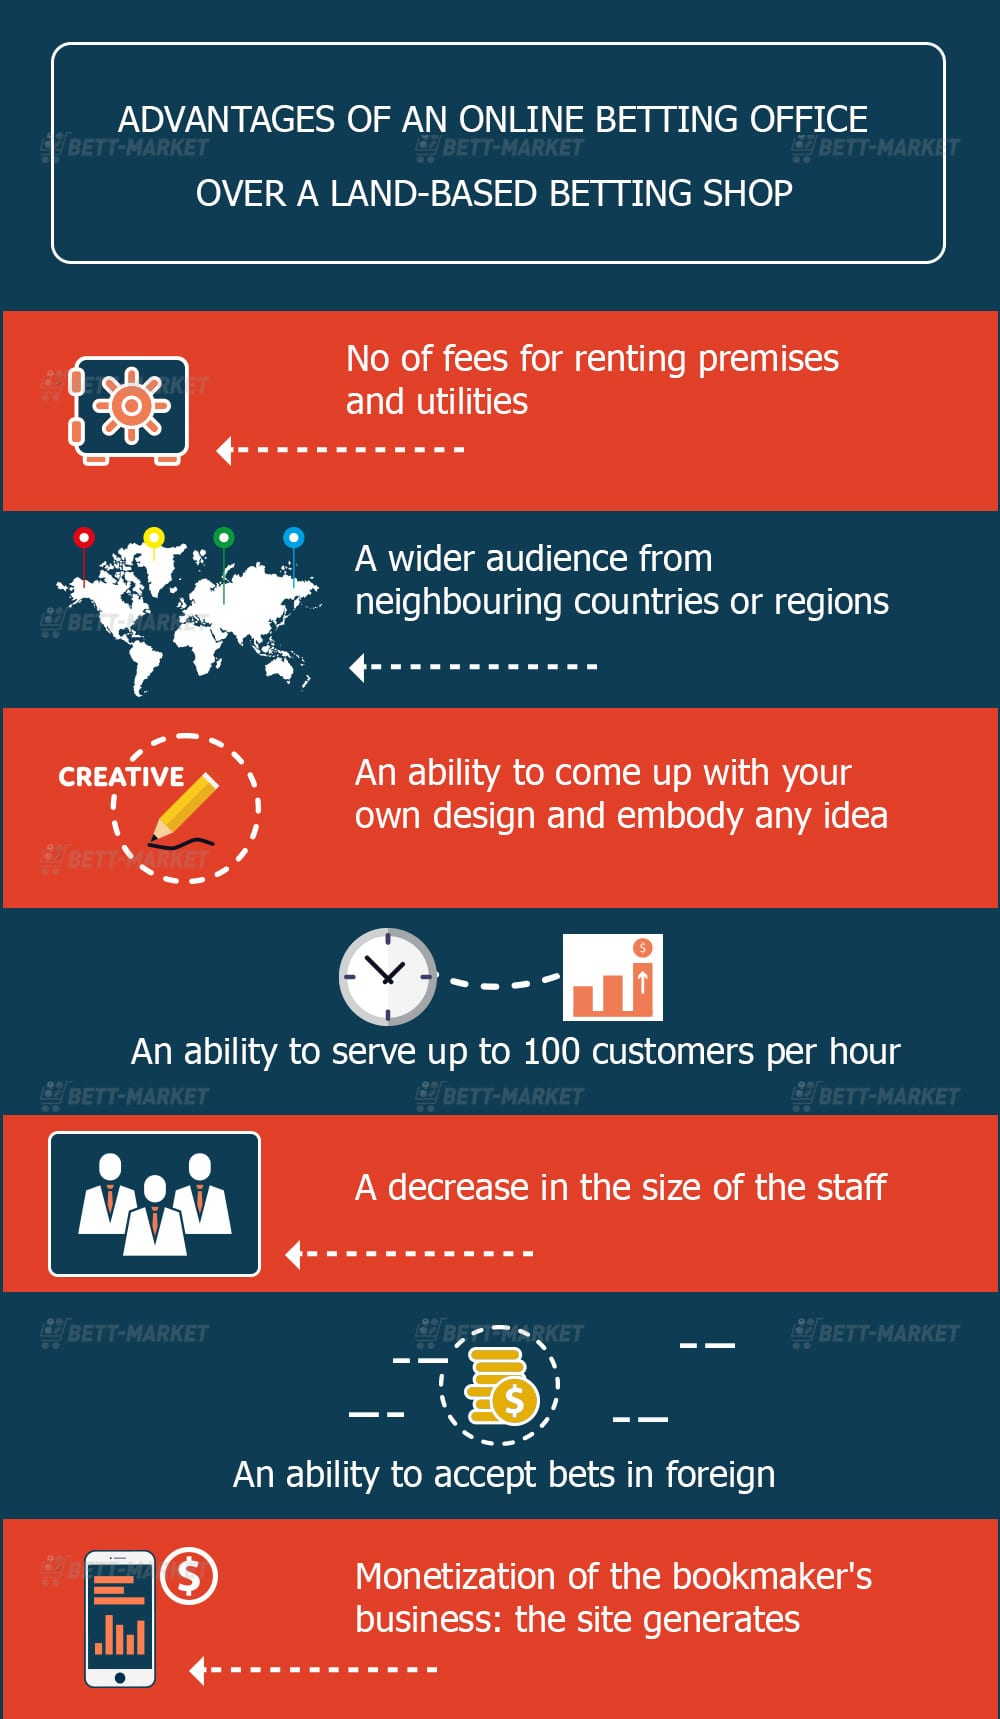 Advantages of an online betting office: infographic